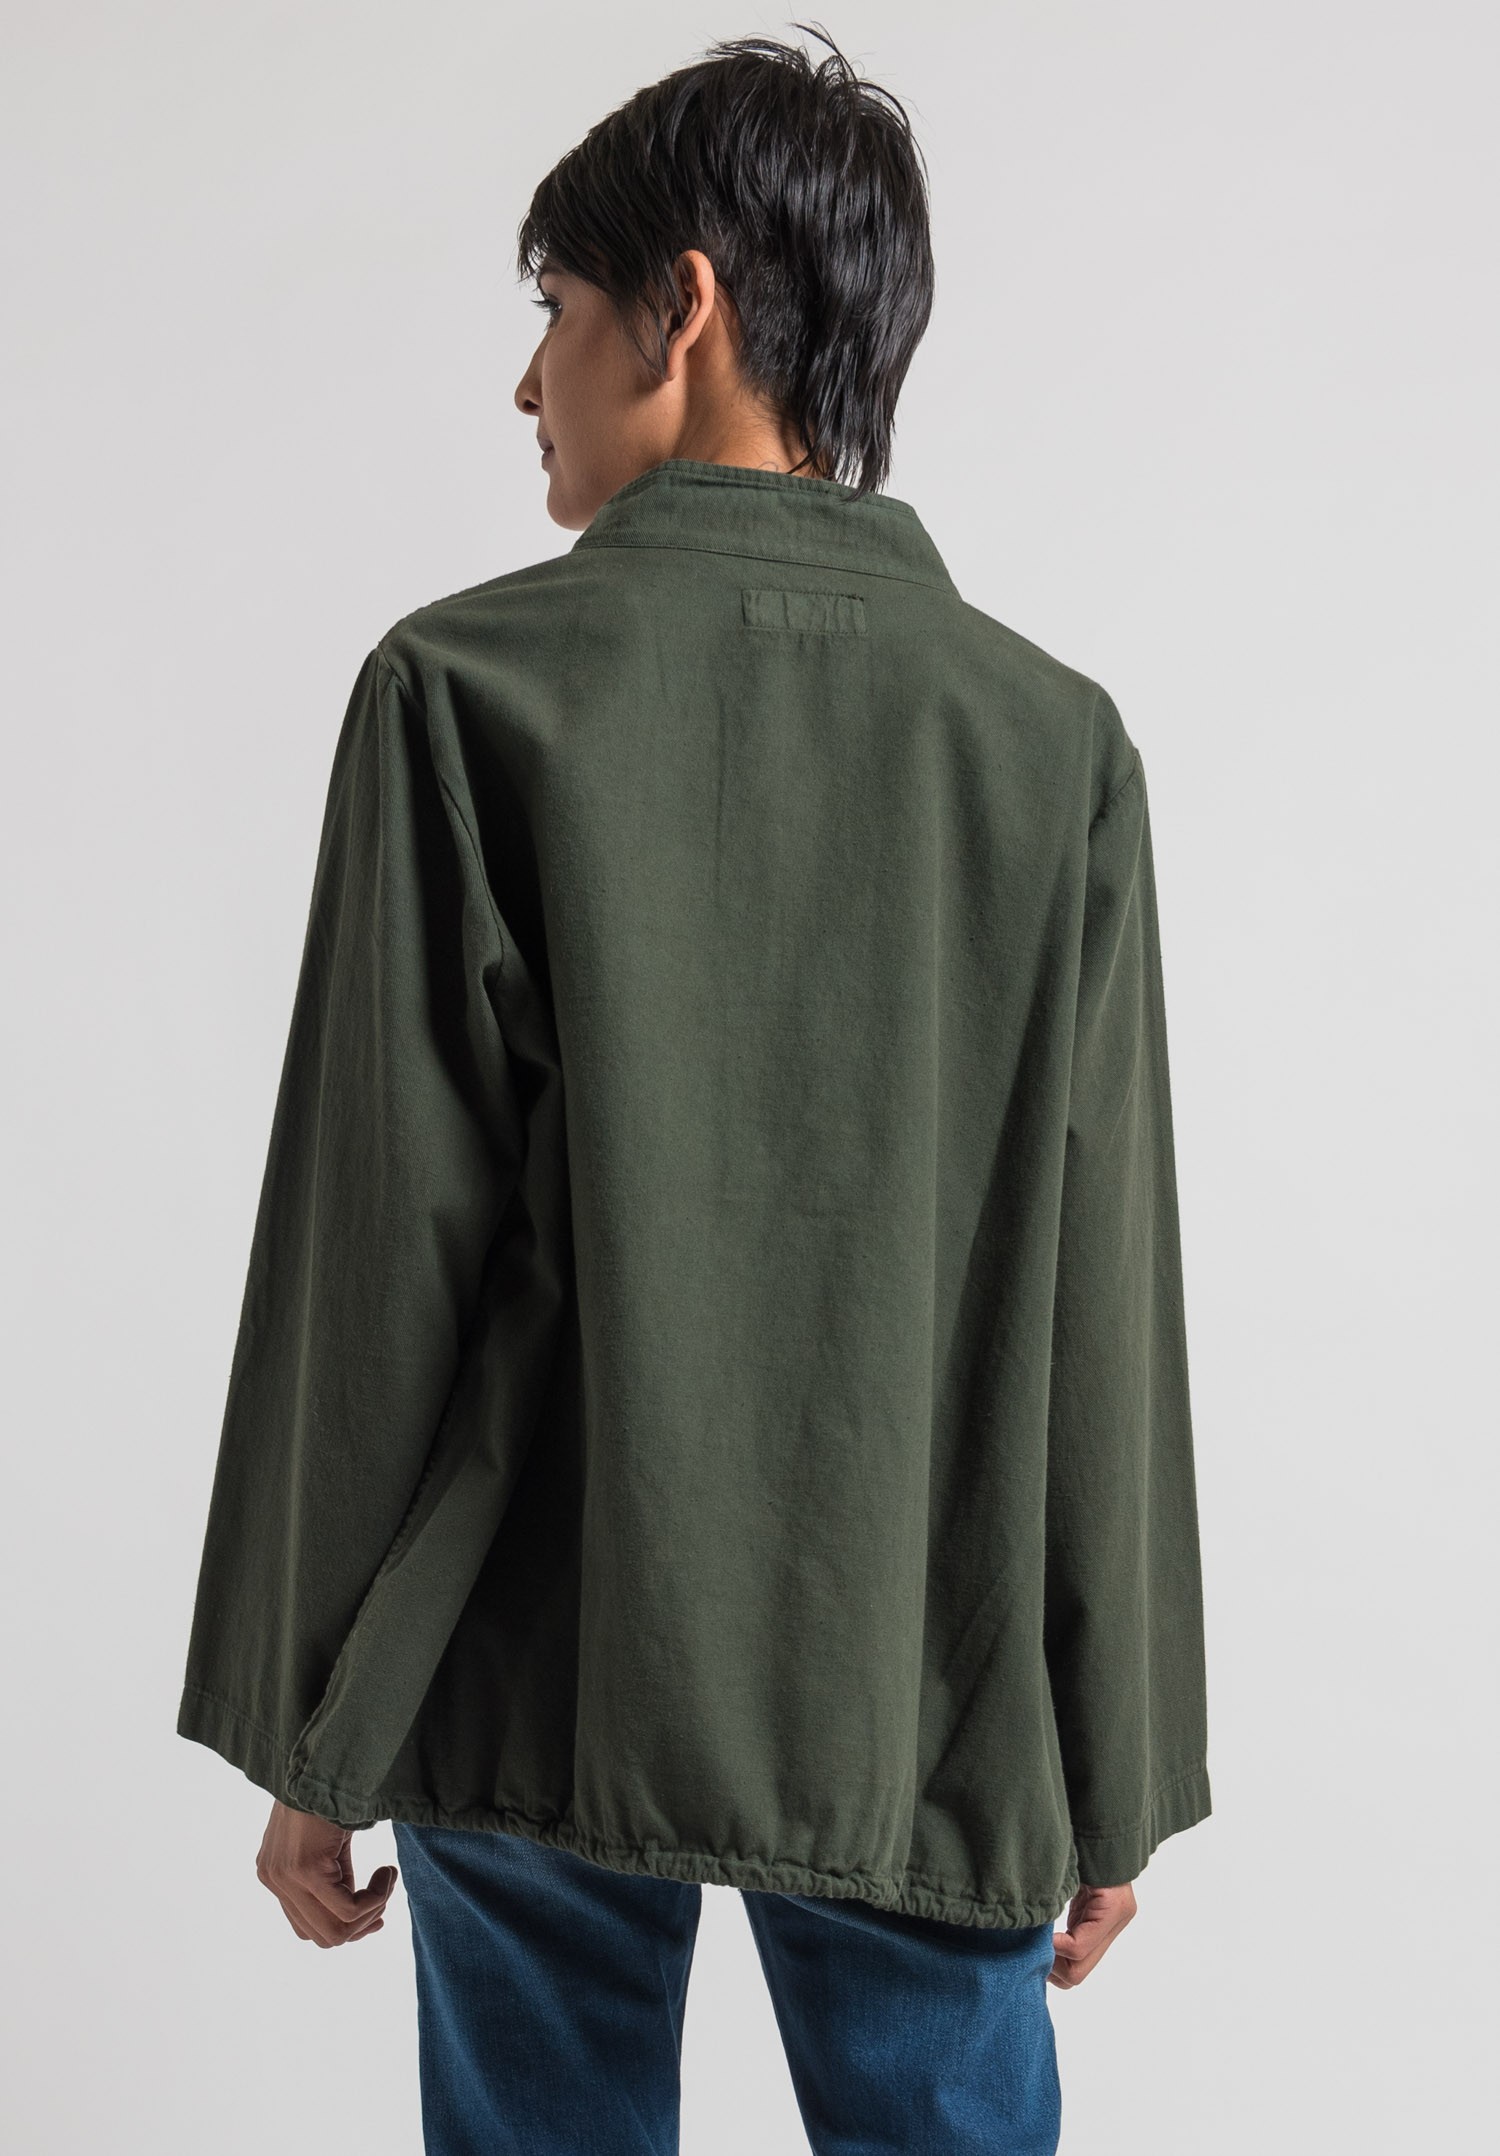 Labo.Art Giacca Ruth Marrakech Jacket in Olive | Santa Fe Dry Goods ...